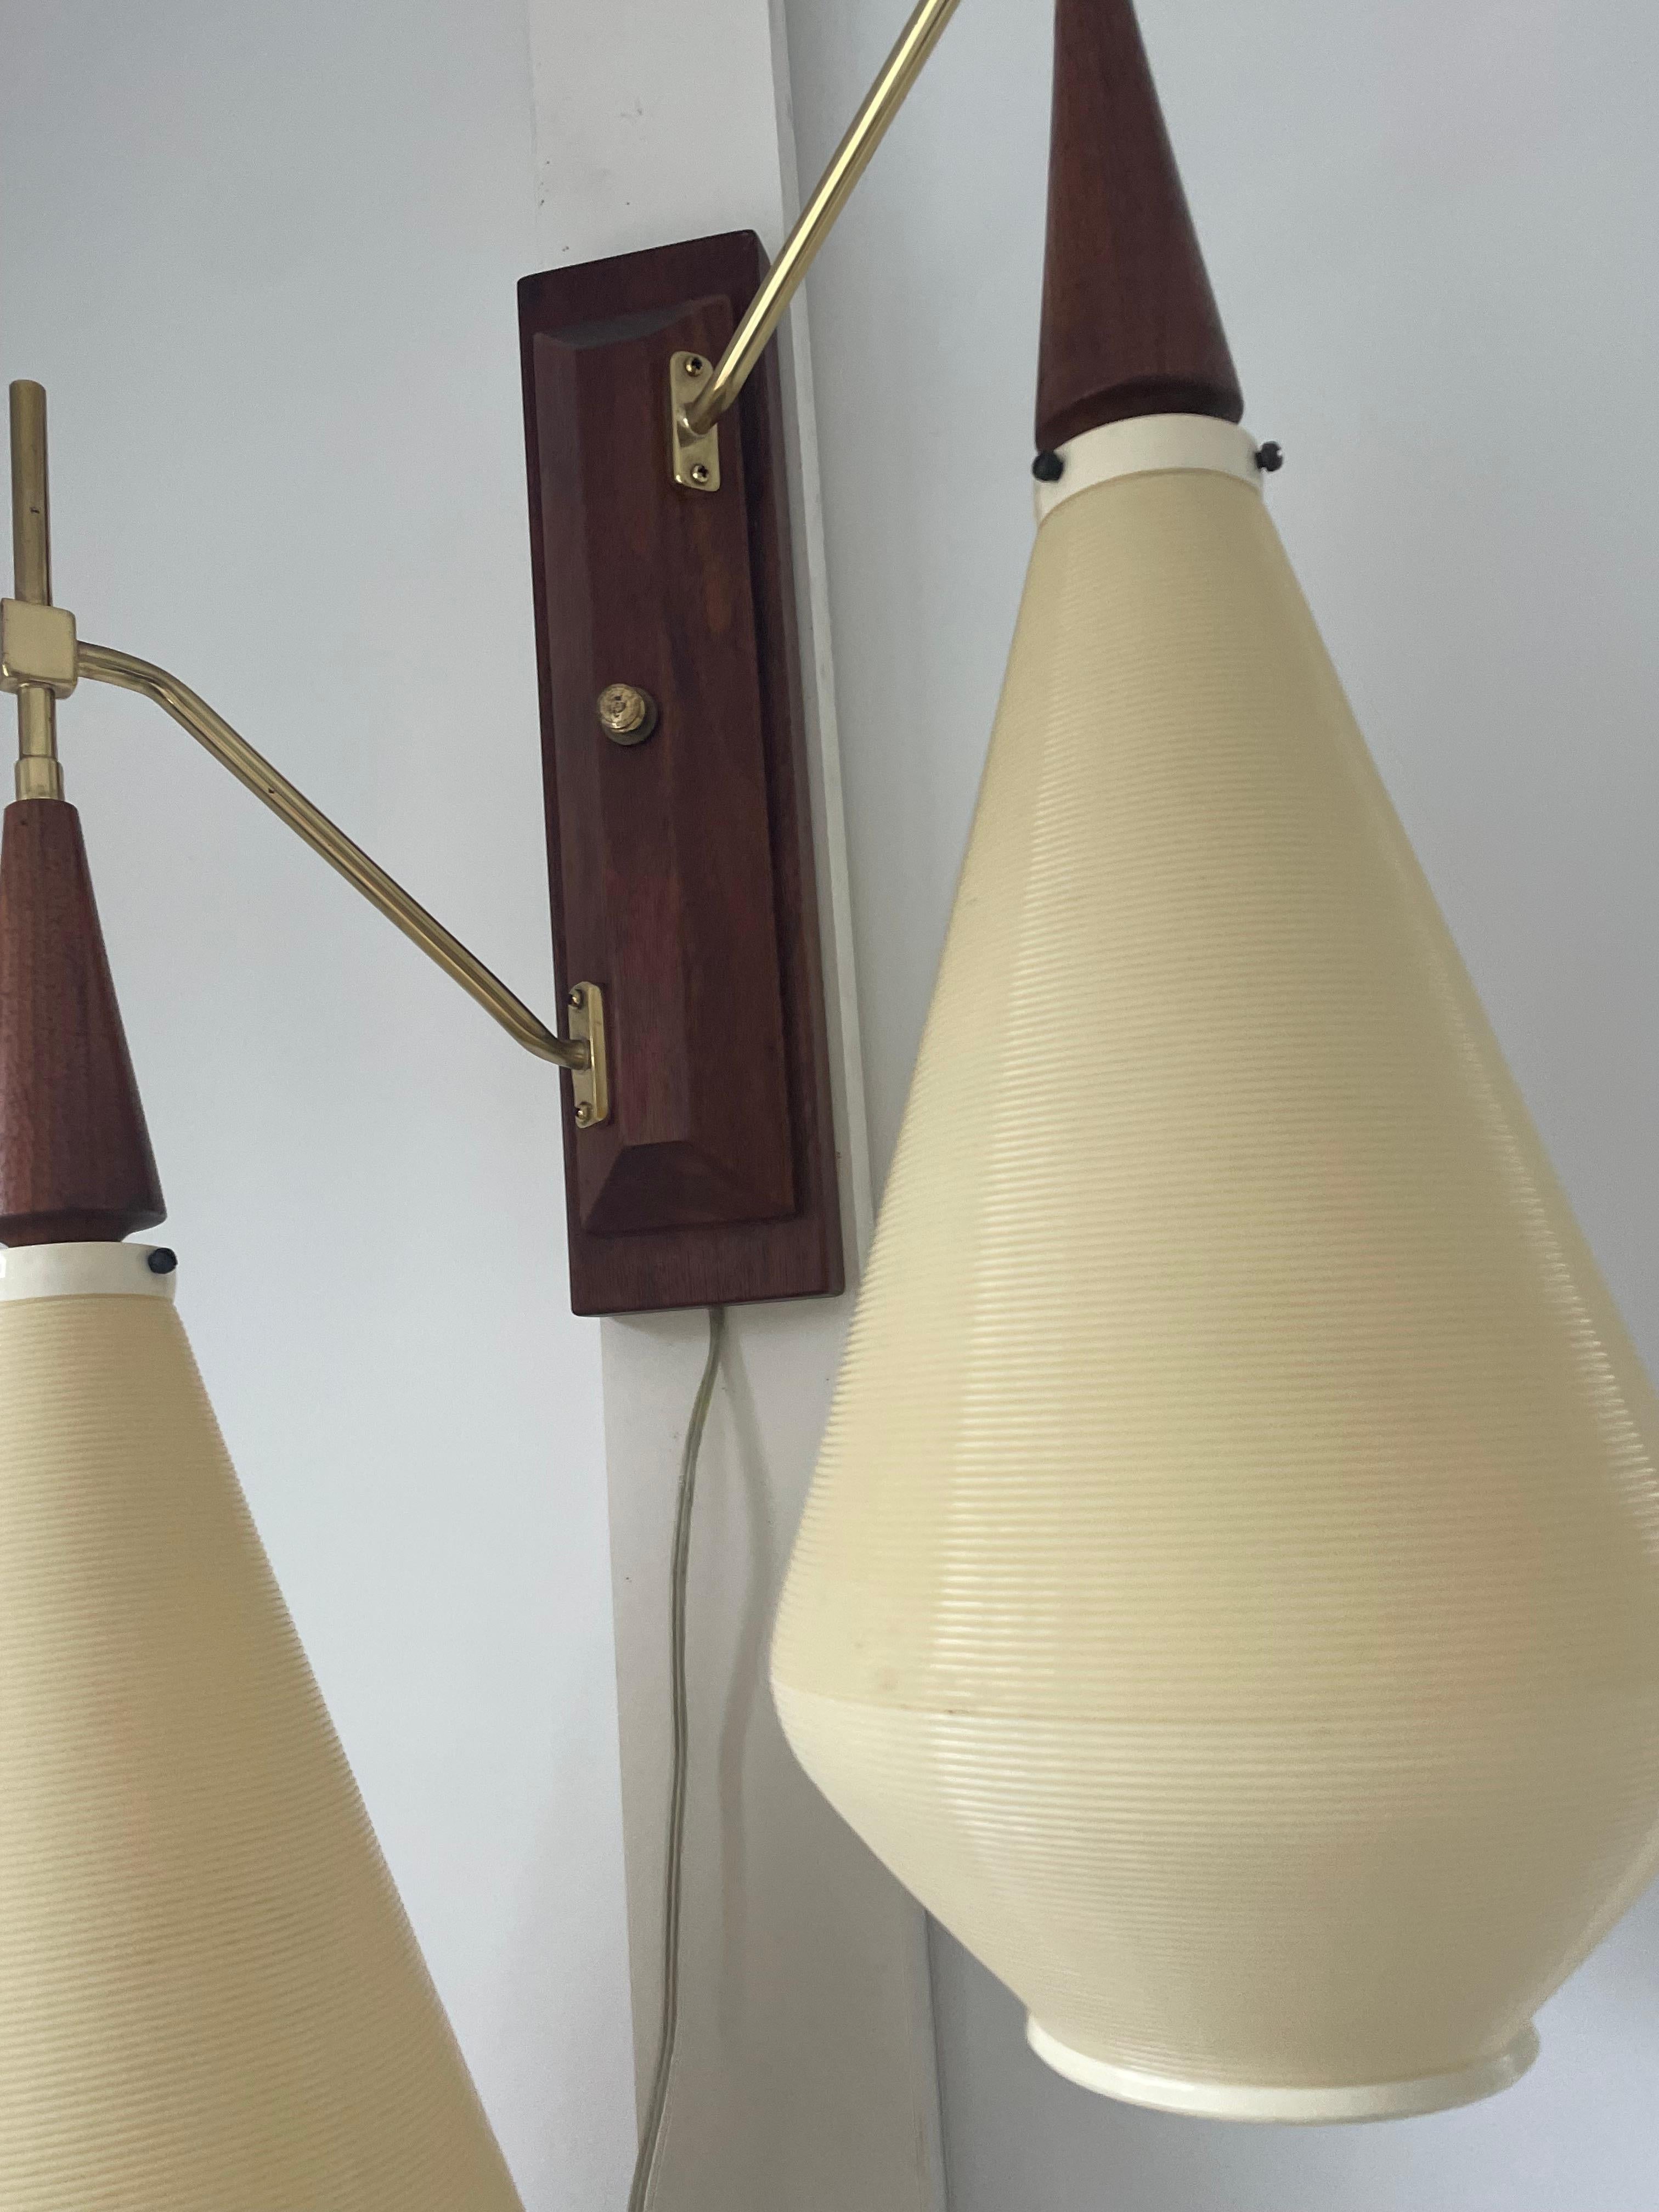 Rare and beautiful rotaflex wall lamp or sconce designed by Yasha Heifetz, The rotaflex teardrop shades are cream colored and made of a ribbed spun cellulose acetate. The arms are brass with teak trim and a teak wall mount. The fixture emits a